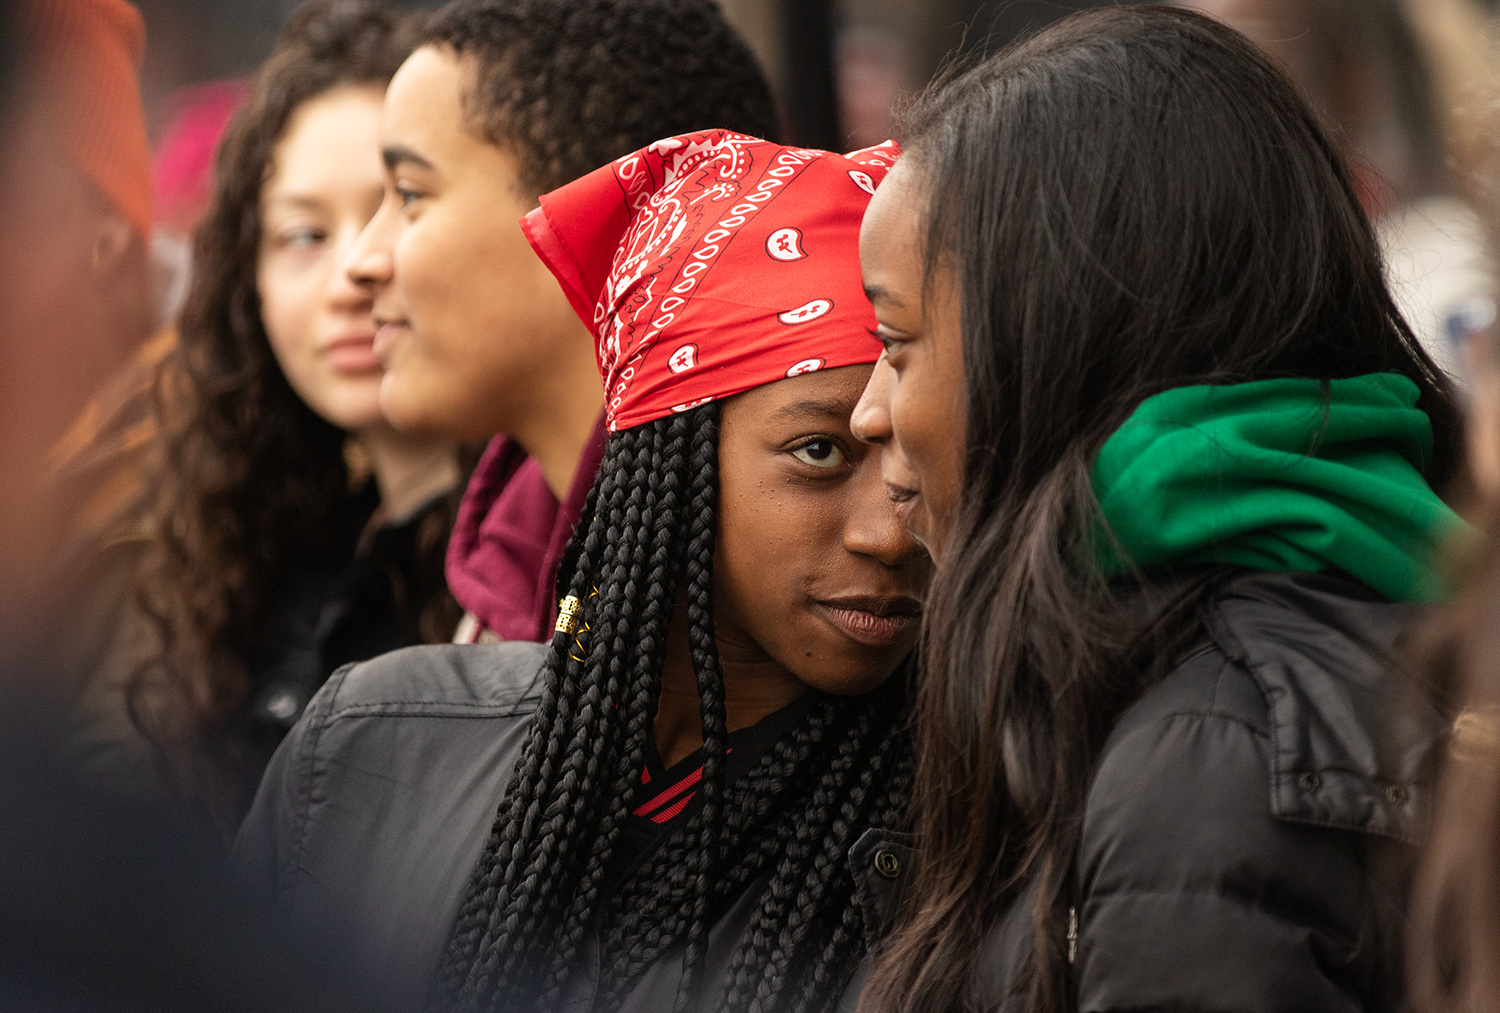  Indigo Irving, center, speaks with her twin, Isis, as University of Oregon students line up during a Martin Luther King Jr. rally outside Autzen Stadium Monday morning, Jan. 21, 2019, in Eugene. 